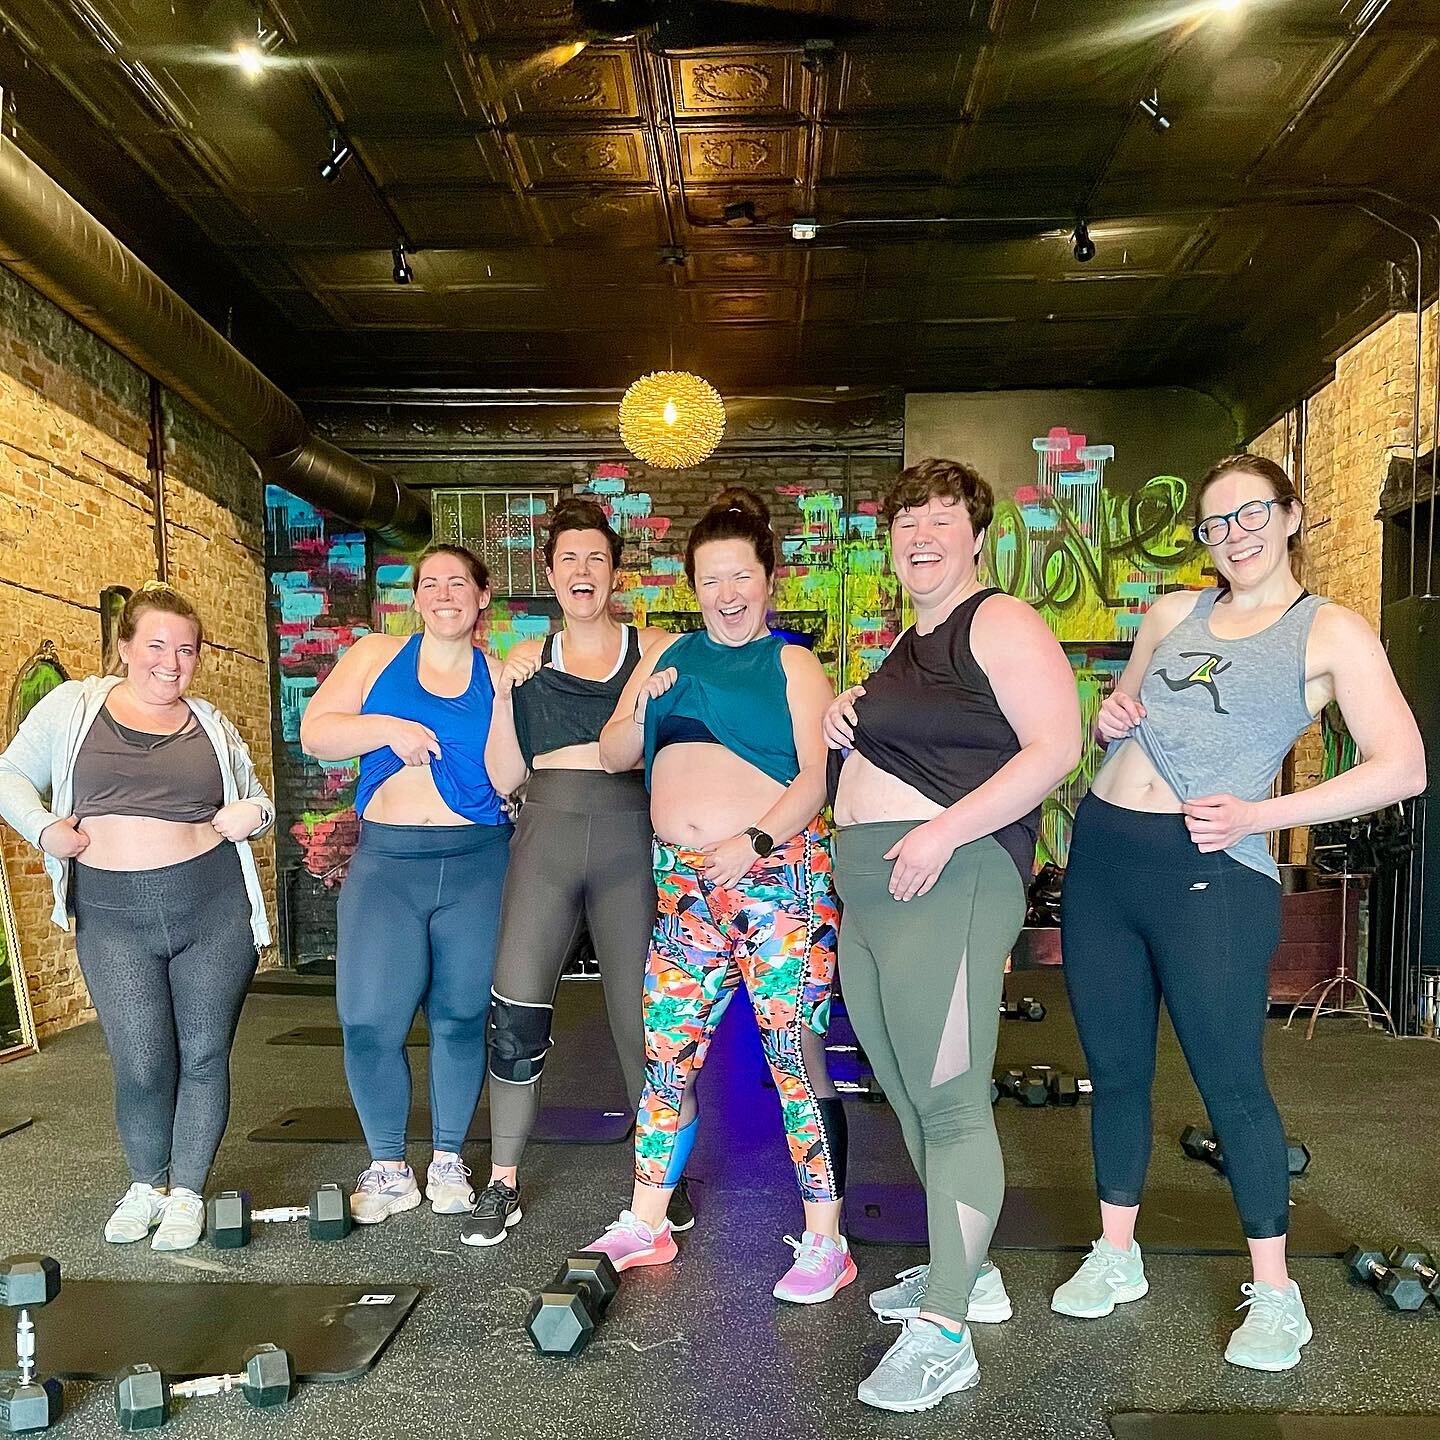 closing out women&rsquo;s history month with the ladies of shak response to @toniocoke post and wanting to show off their abs also. 

well played. 😂👏🏼💪🏼😎

happy friday! 

💛 our community

#bodishak #happyfriday #ladiesofshak #wellplayed #women